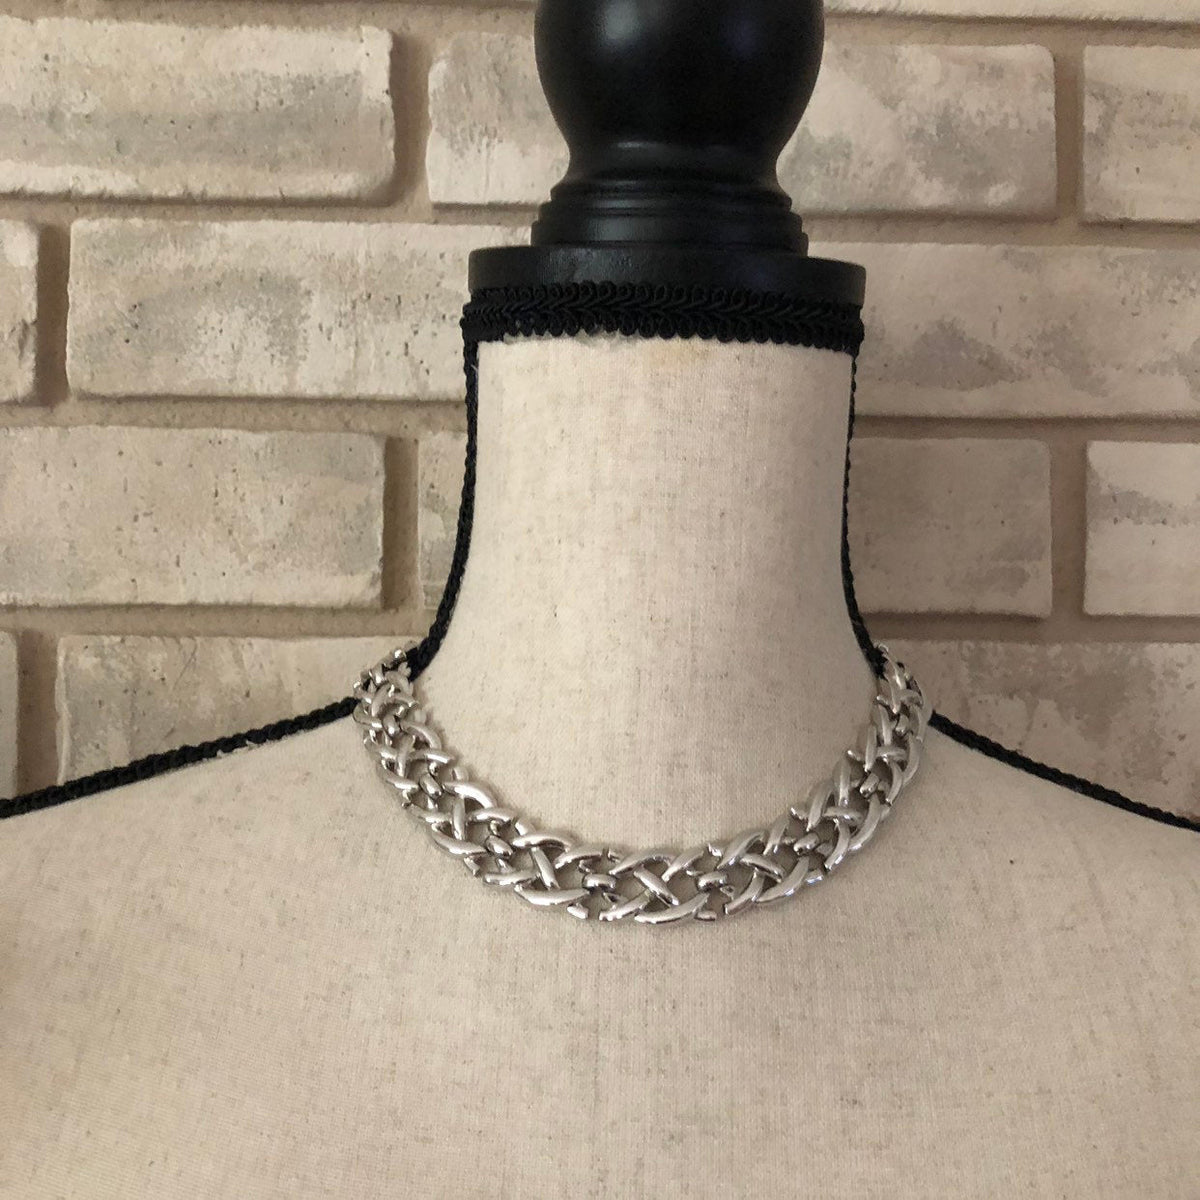 Vintage Silver Crown Trifari Weave Necklace - 24 Wishes Vintage Jewelry